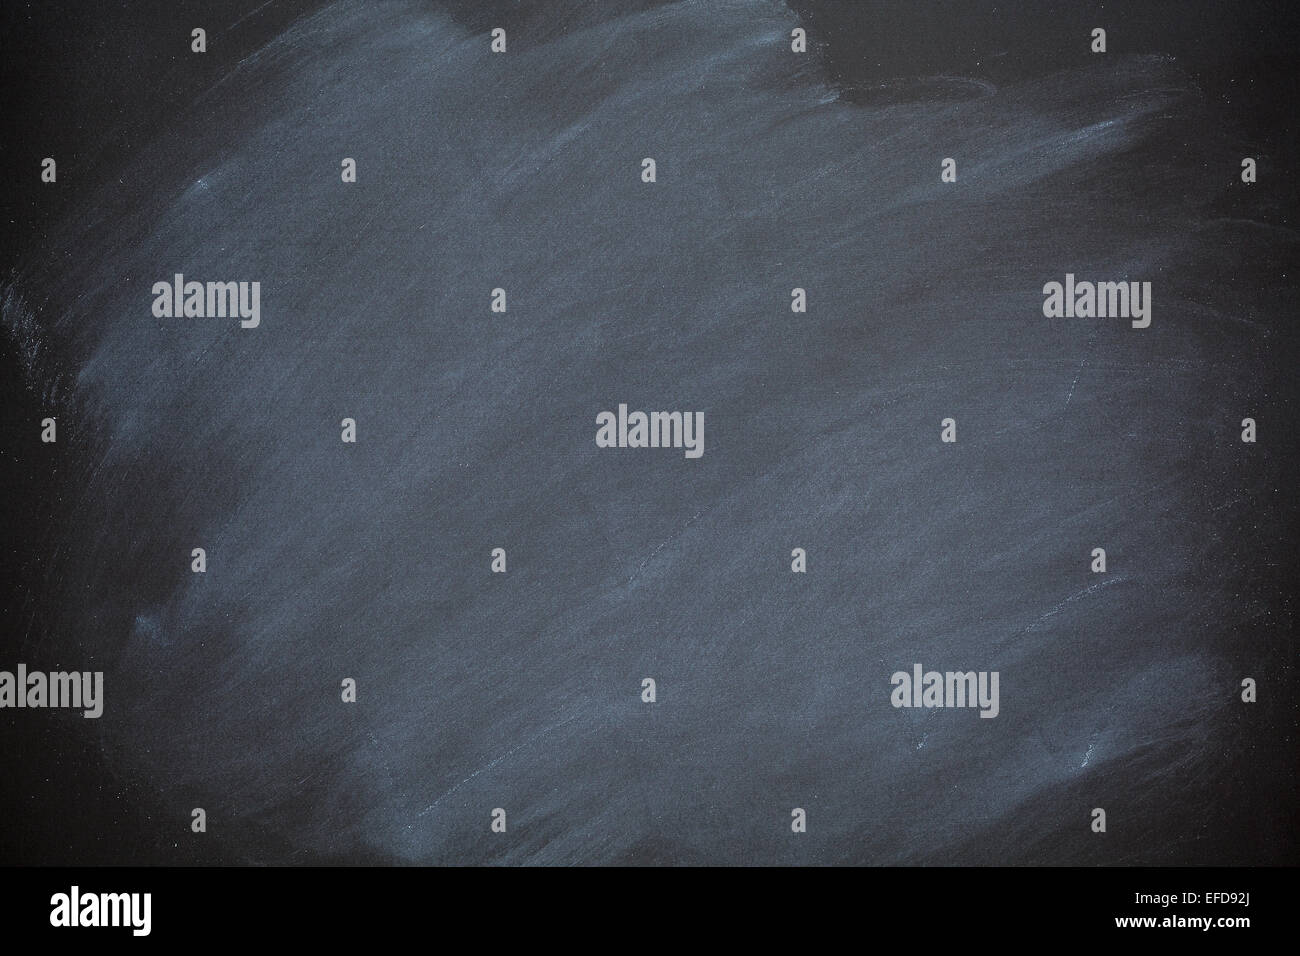 Wooden table, blackboard, chalk, sponge, table, wood, board, blackboard,  blackboard eraser, blackboard chalk, pieces of chalk, two, white, school  suply, letters, capital letters, abc, alphabet, learning, writing,  reflexion Stock Photo - Alamy